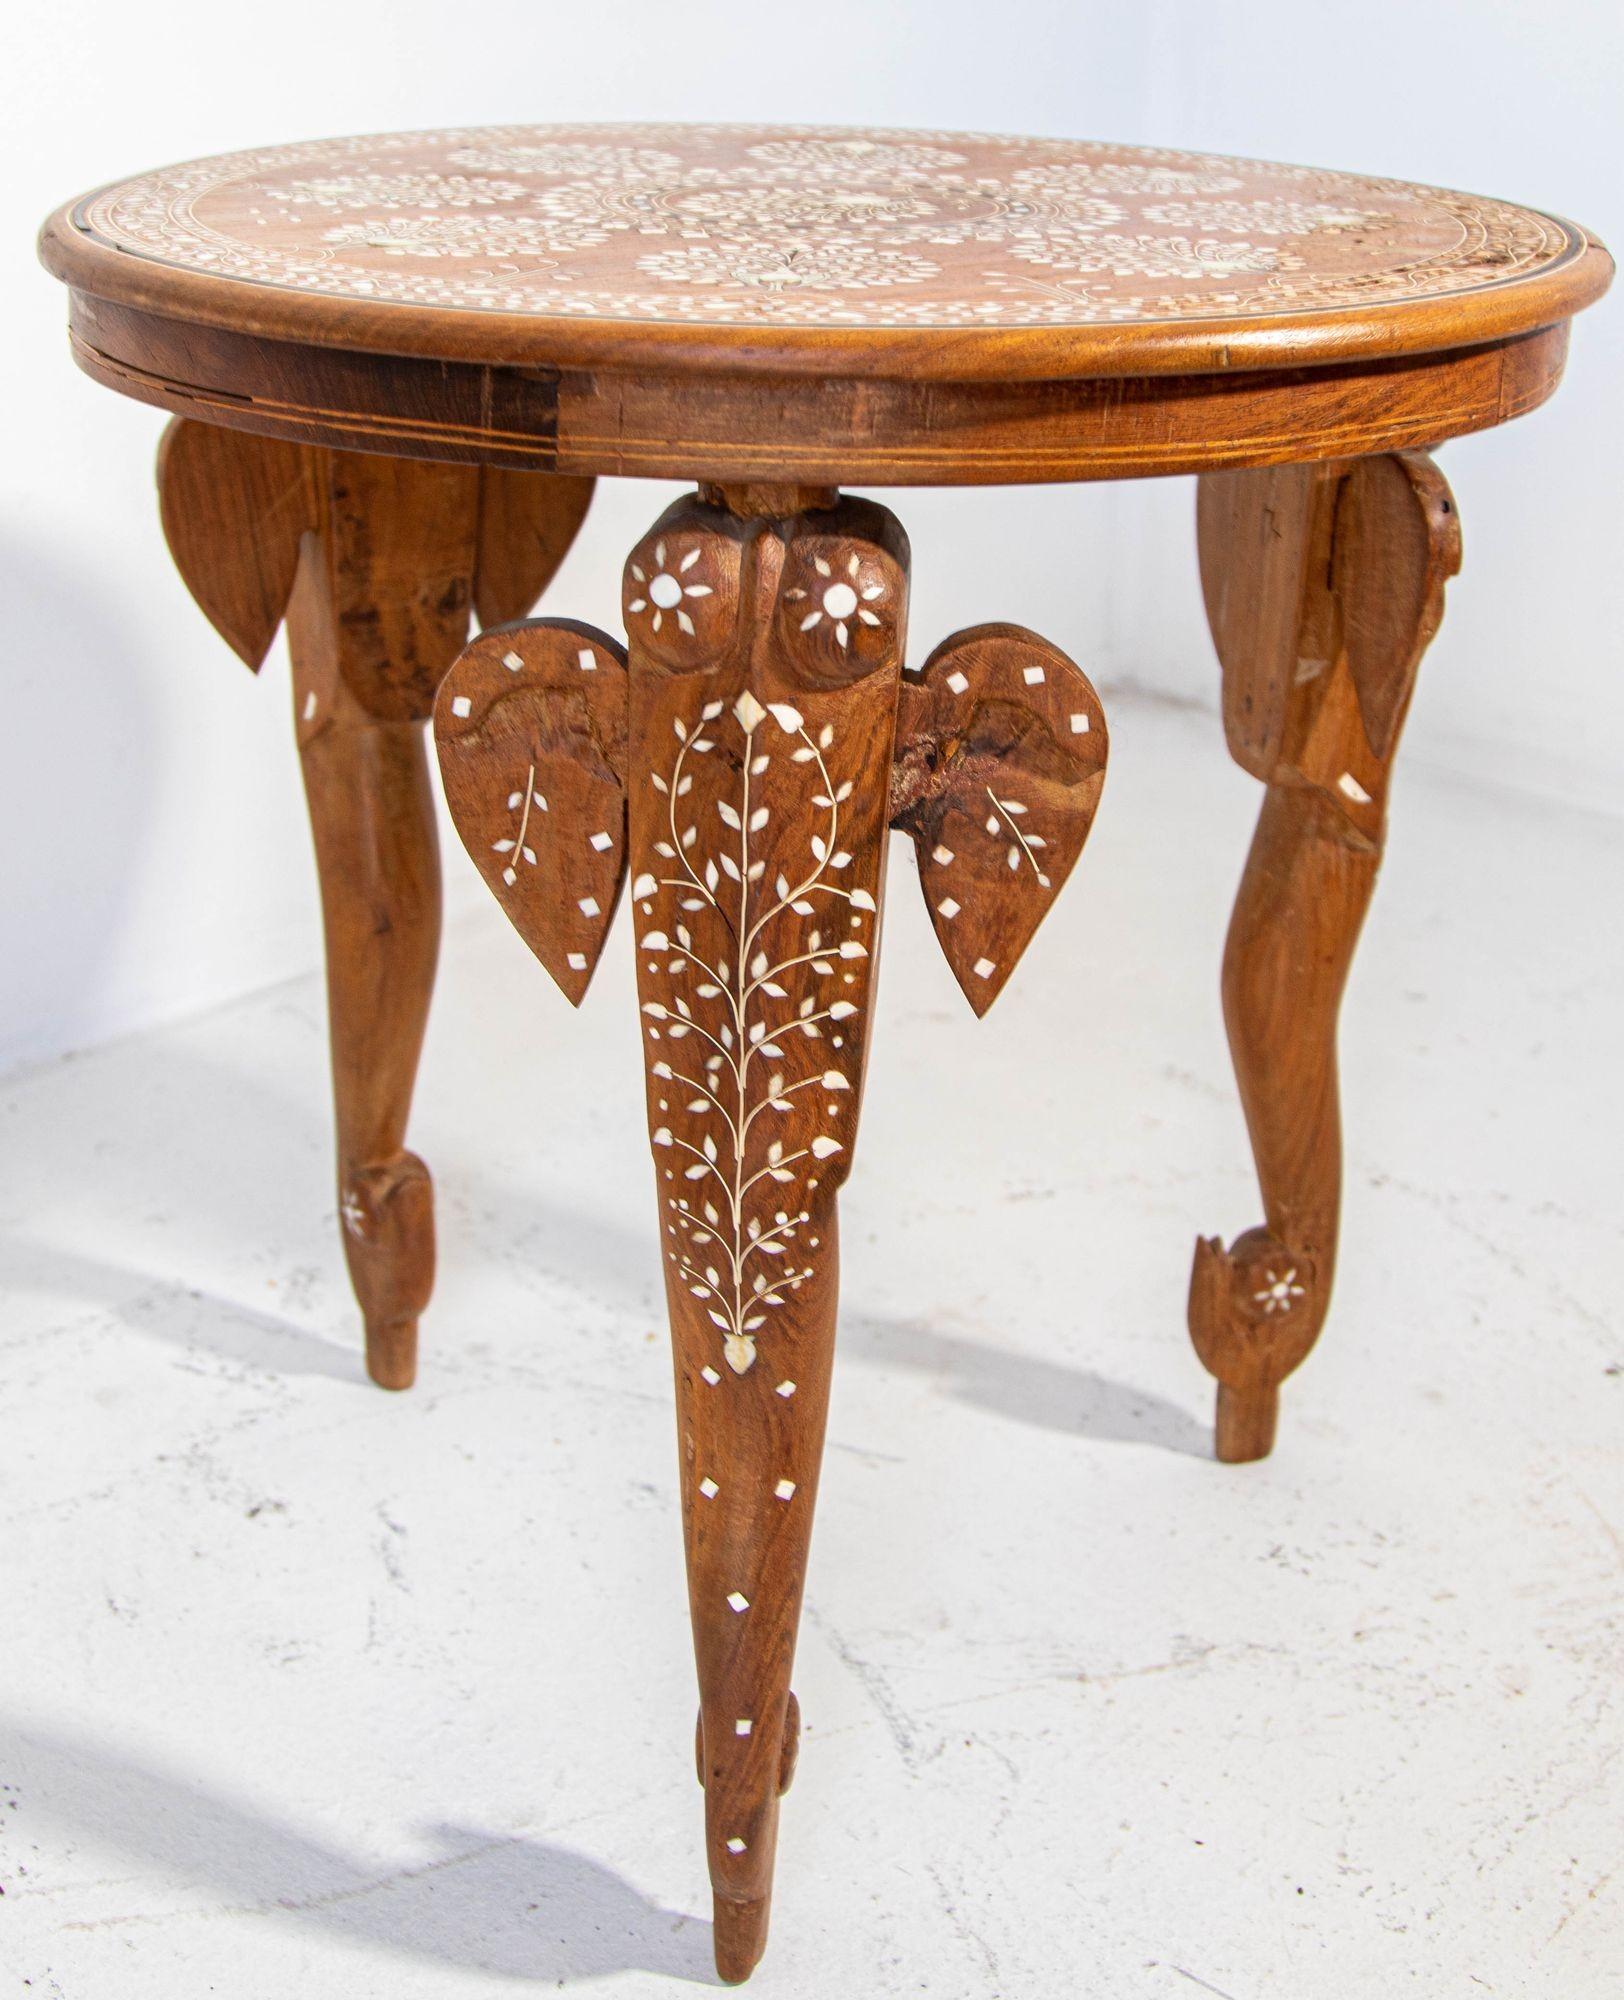 19th c, Anglo Indian Mughal Teak Inlaid Round Side Table.
Antique 19th c. Anglo Indian Mughal teak inlaid side table.
Fine and elegant Moorish round side table hand carved with bone inlaid elaborate peacock design.
With elephant inlaid bone